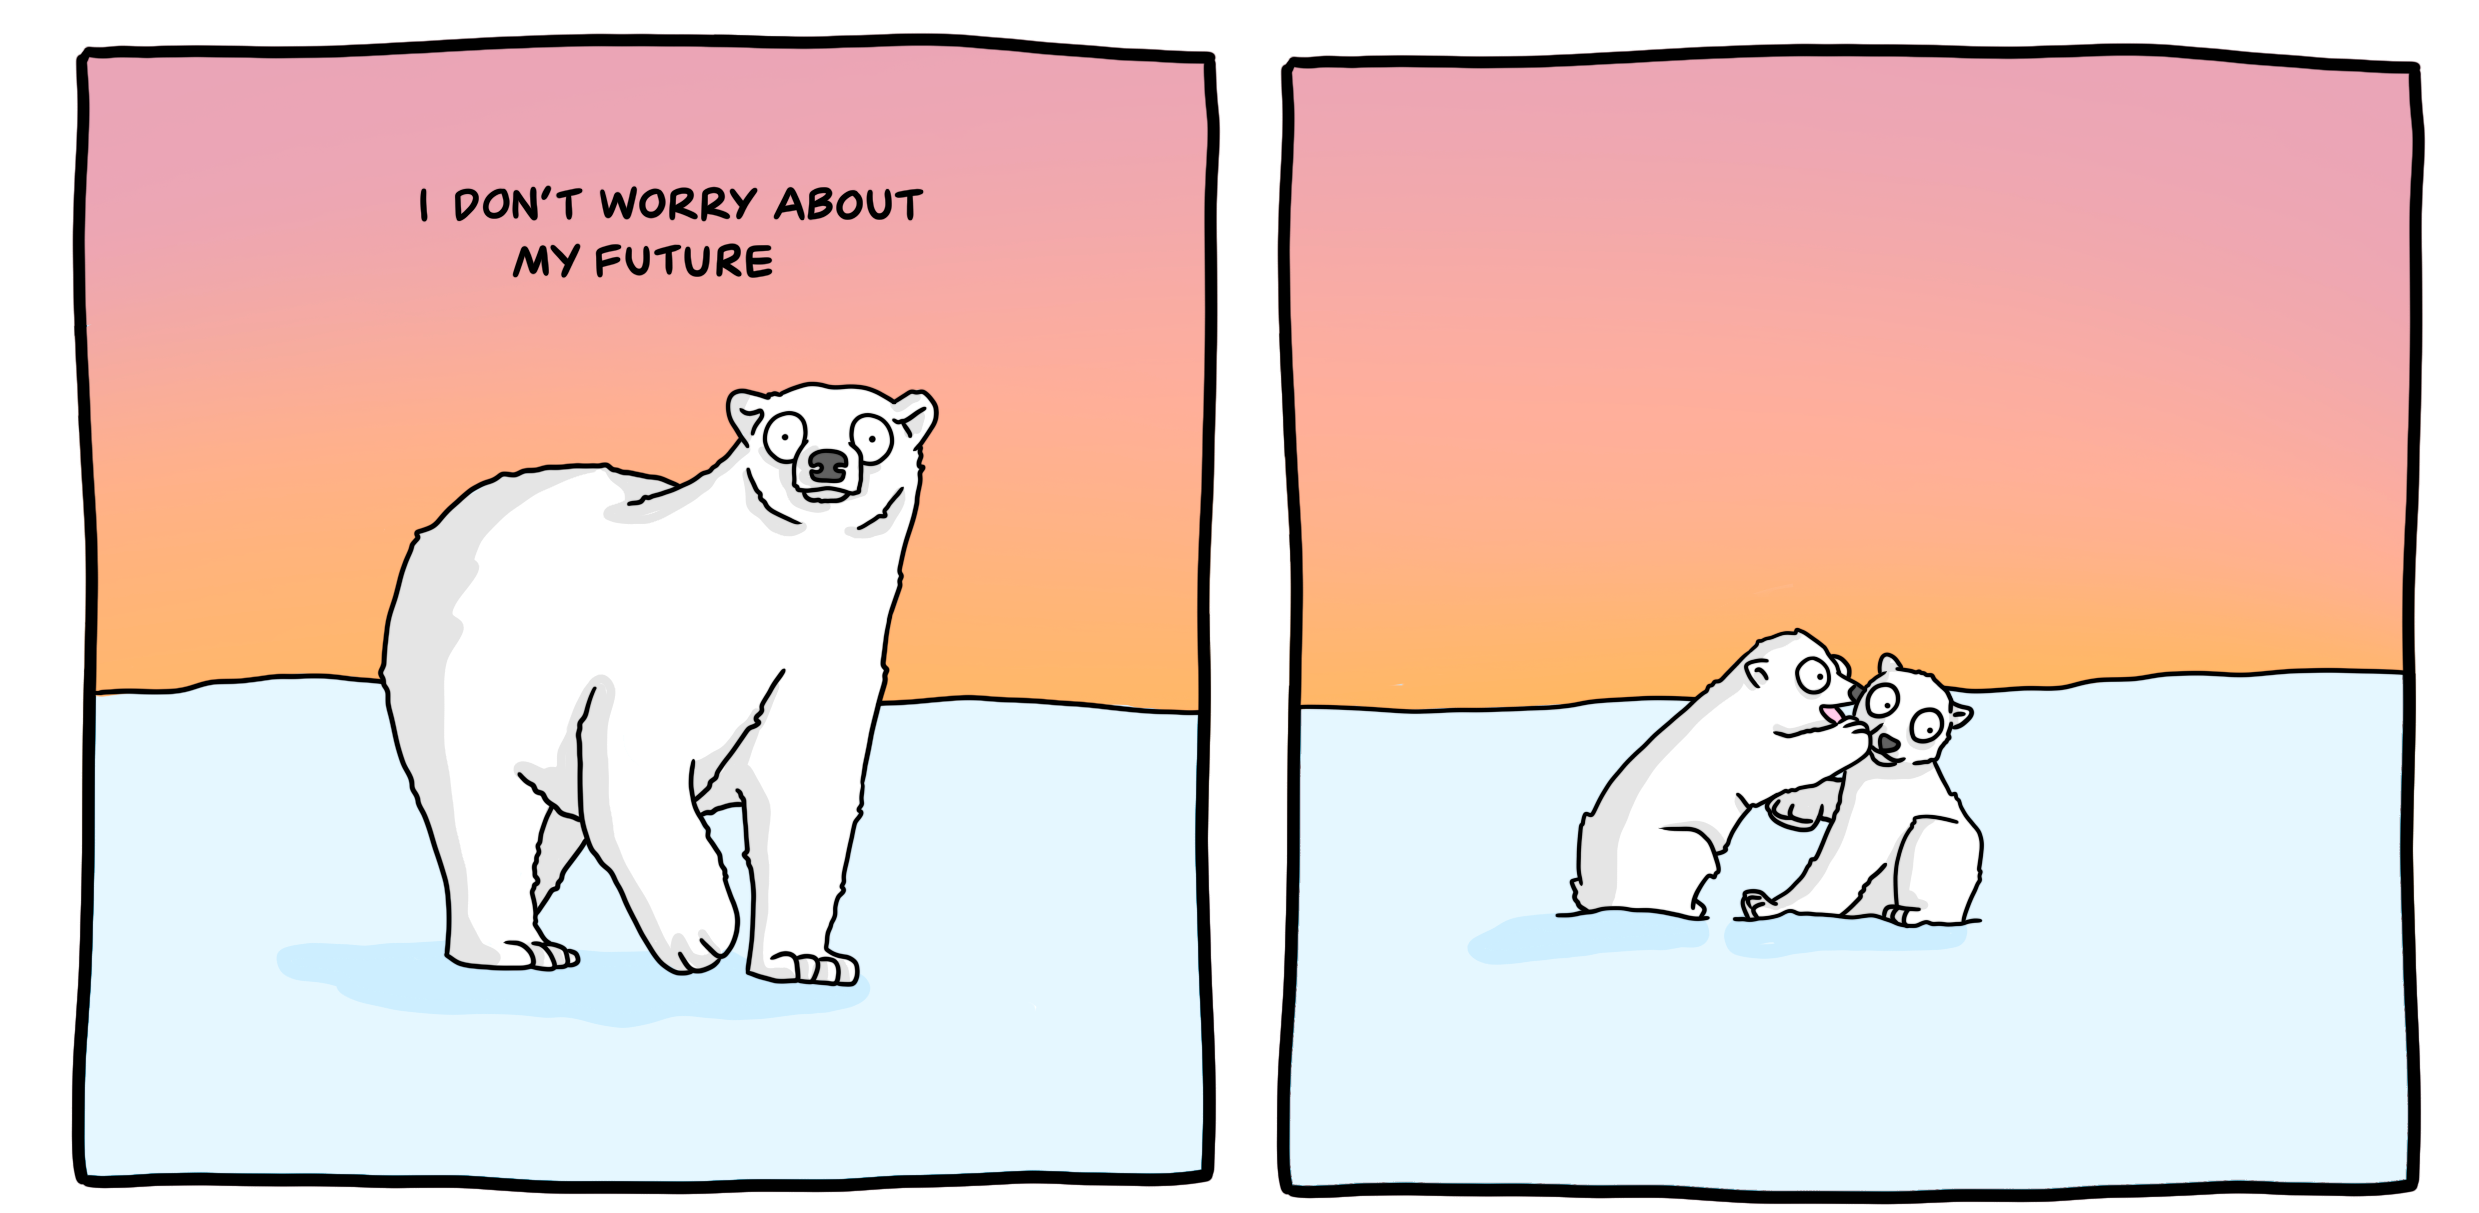 I don't worry about their future - From Anxious Animals - panel 1